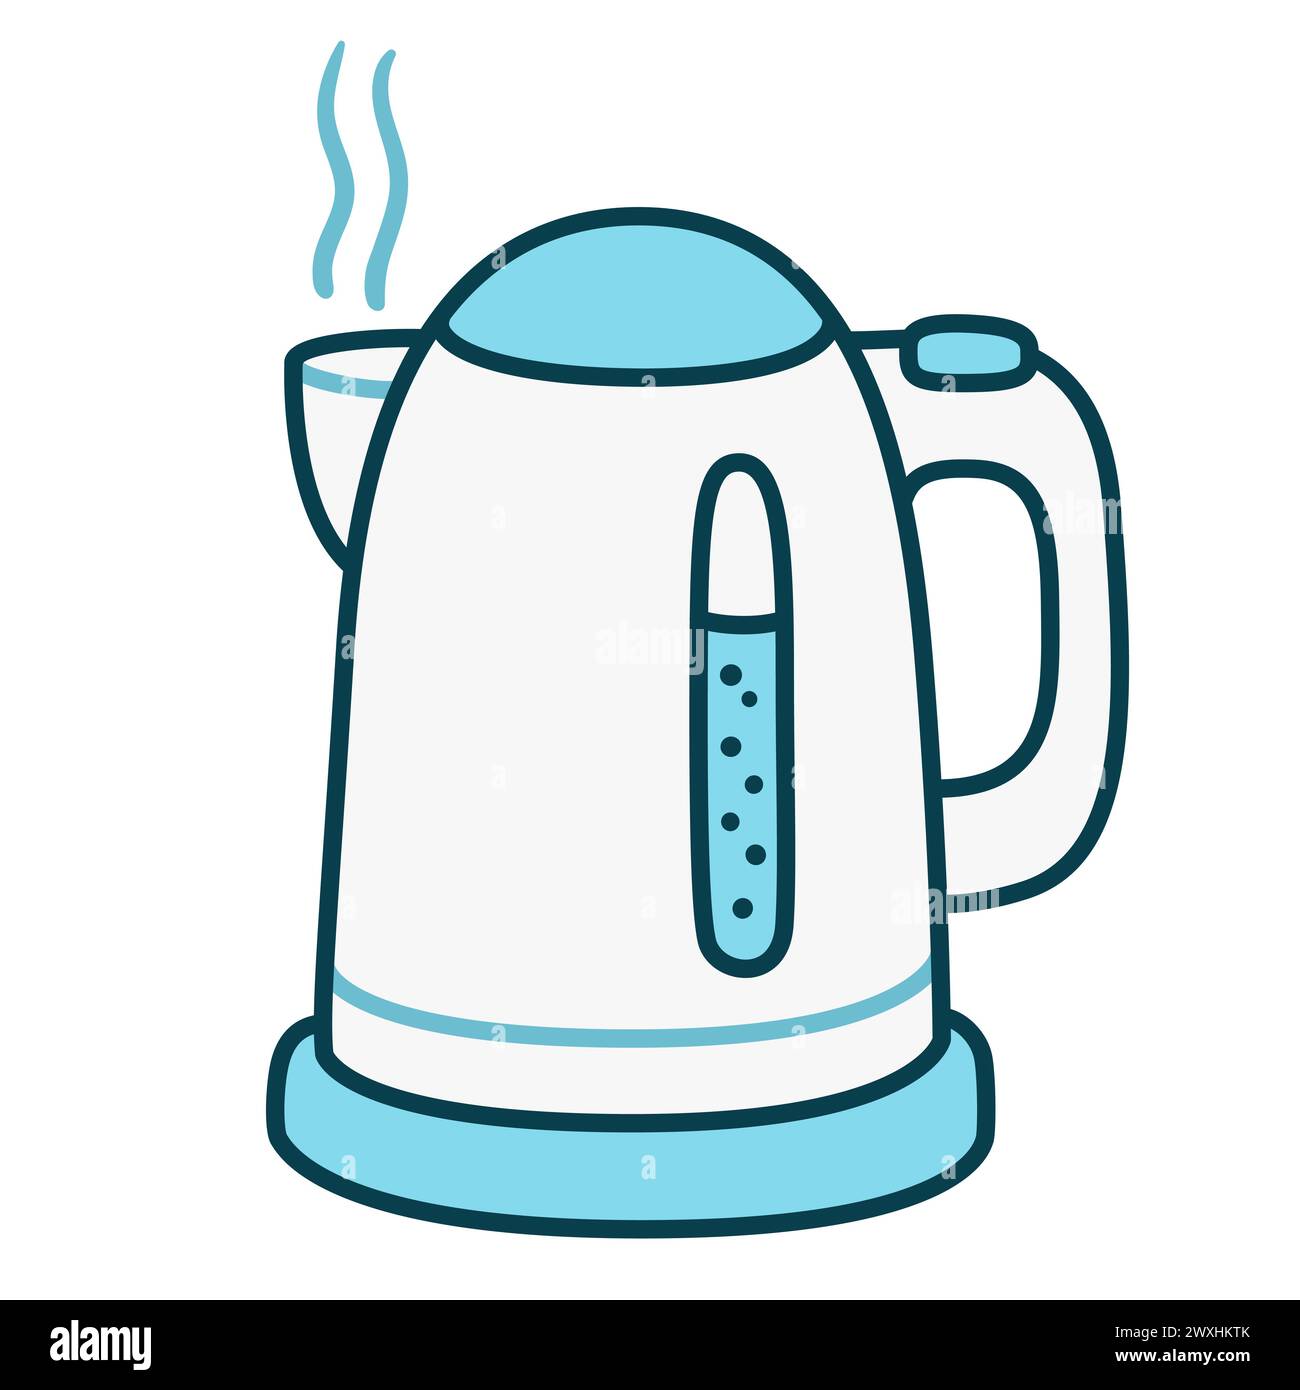 Electric kettle, simple cartoon drawing. White and blue doodle icon. Hand drawn vector illustration. Stock Vector